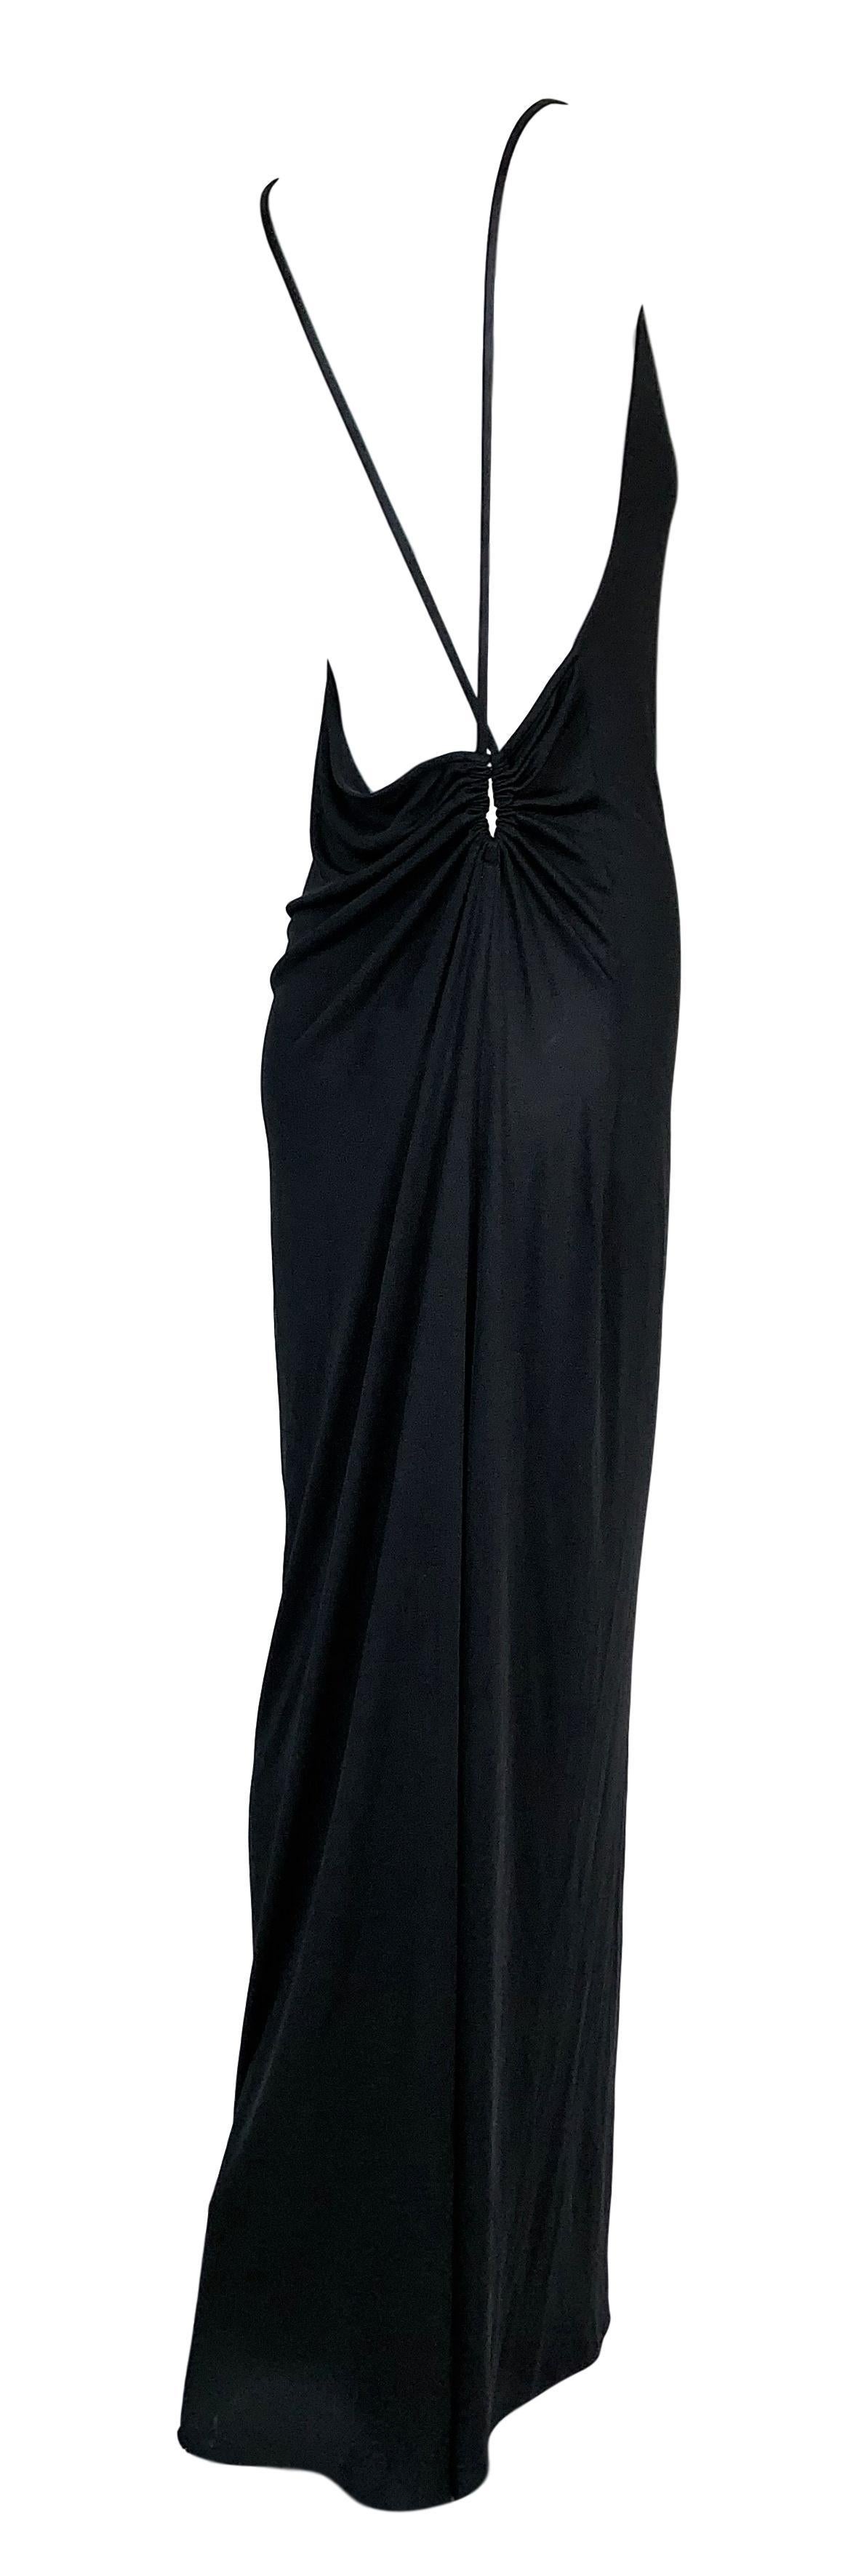 1999 Gucci by Tom Ford Black Slinky Backless Long Column Gown Dress 42